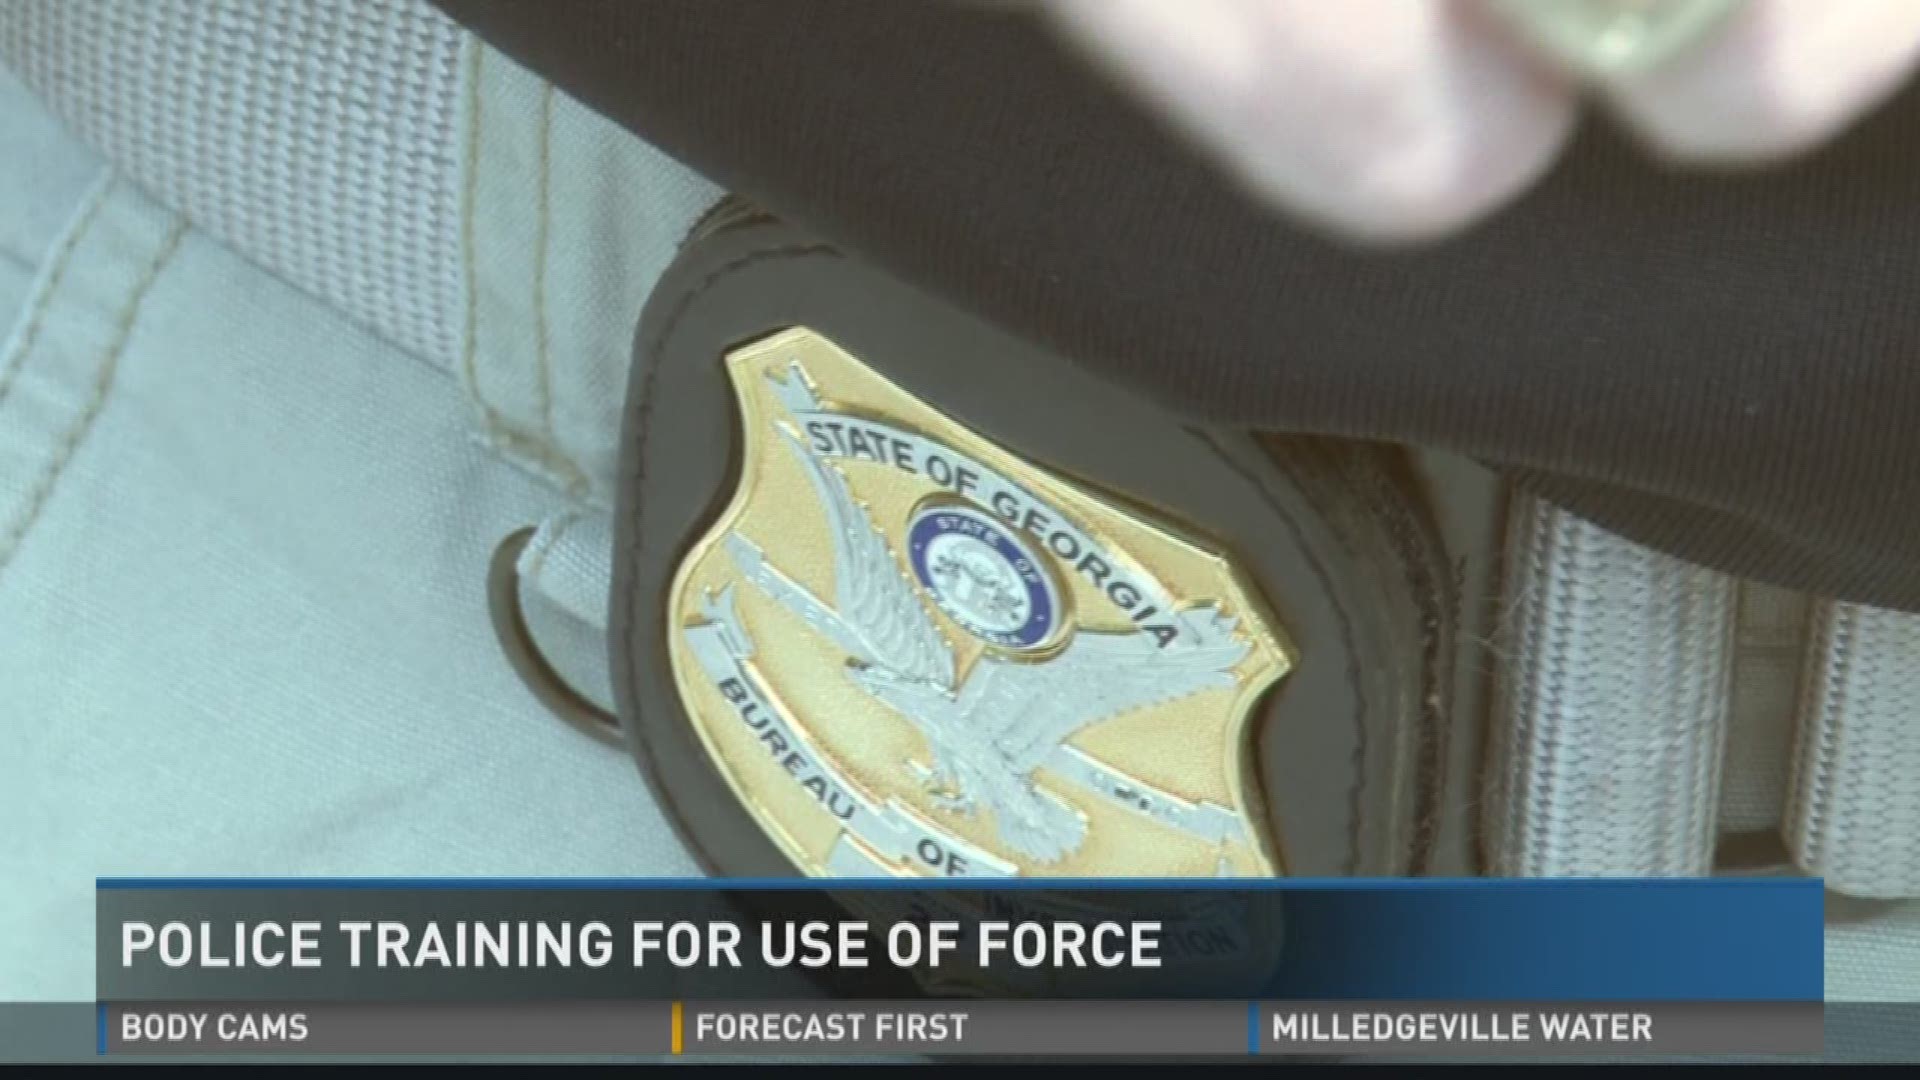 Police training for use of force